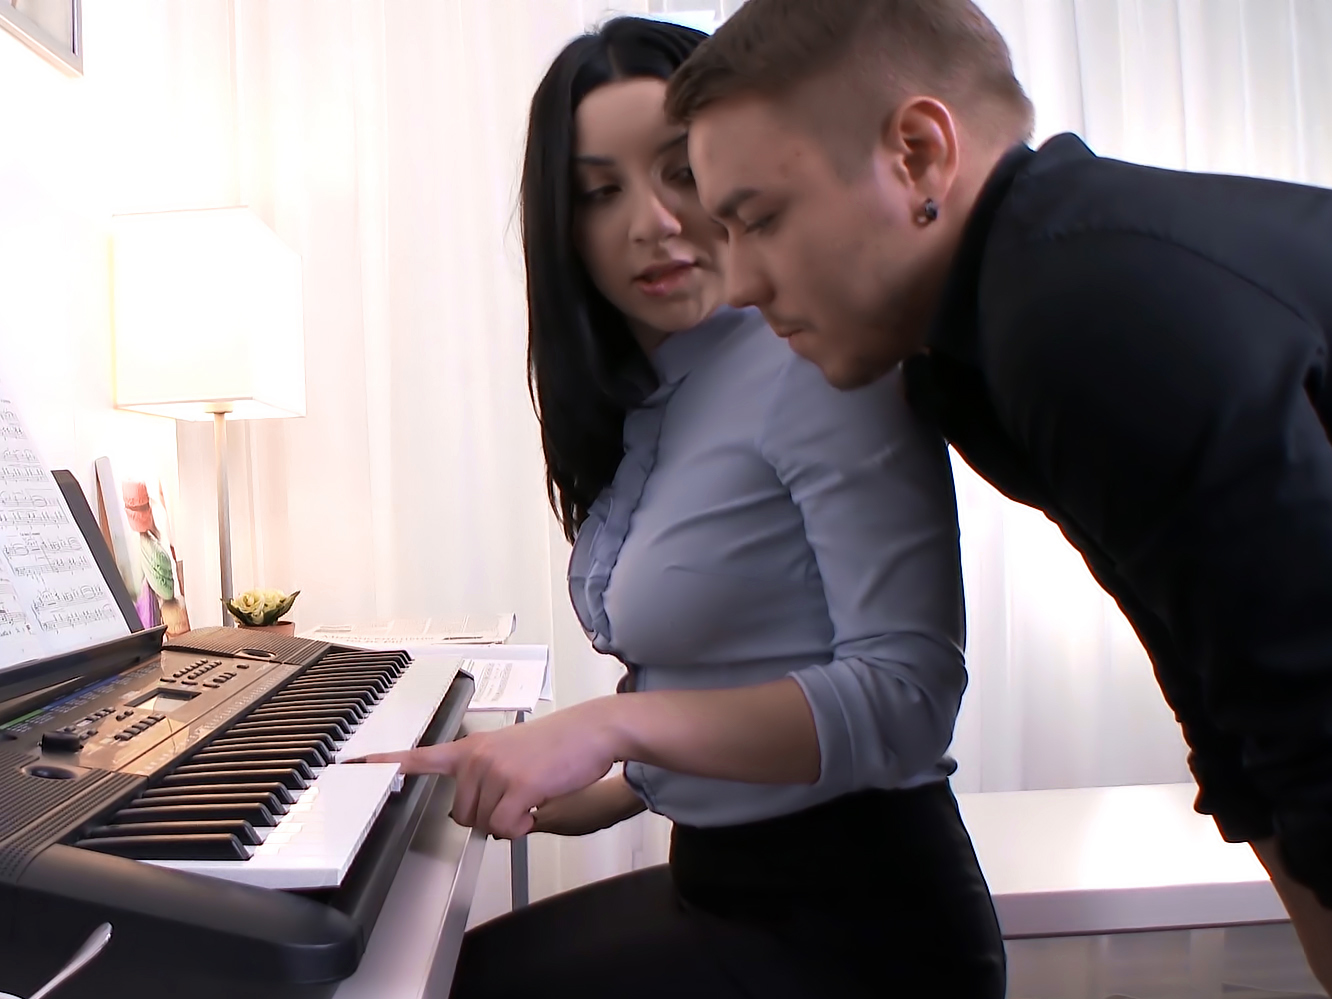 Threesome with piano teacher and students